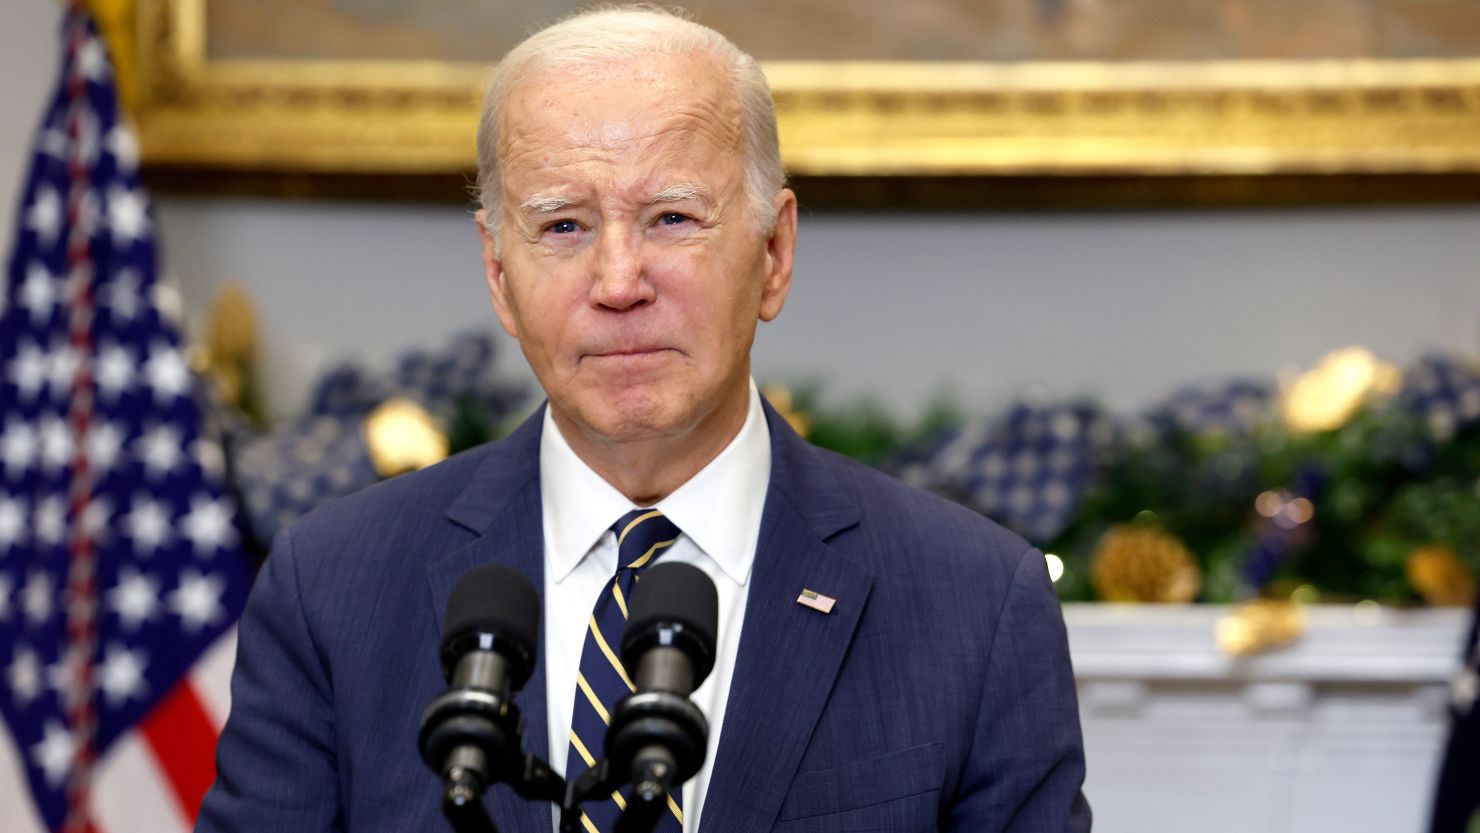 Biden is willing to make a deal on immigration. But he’s in for a